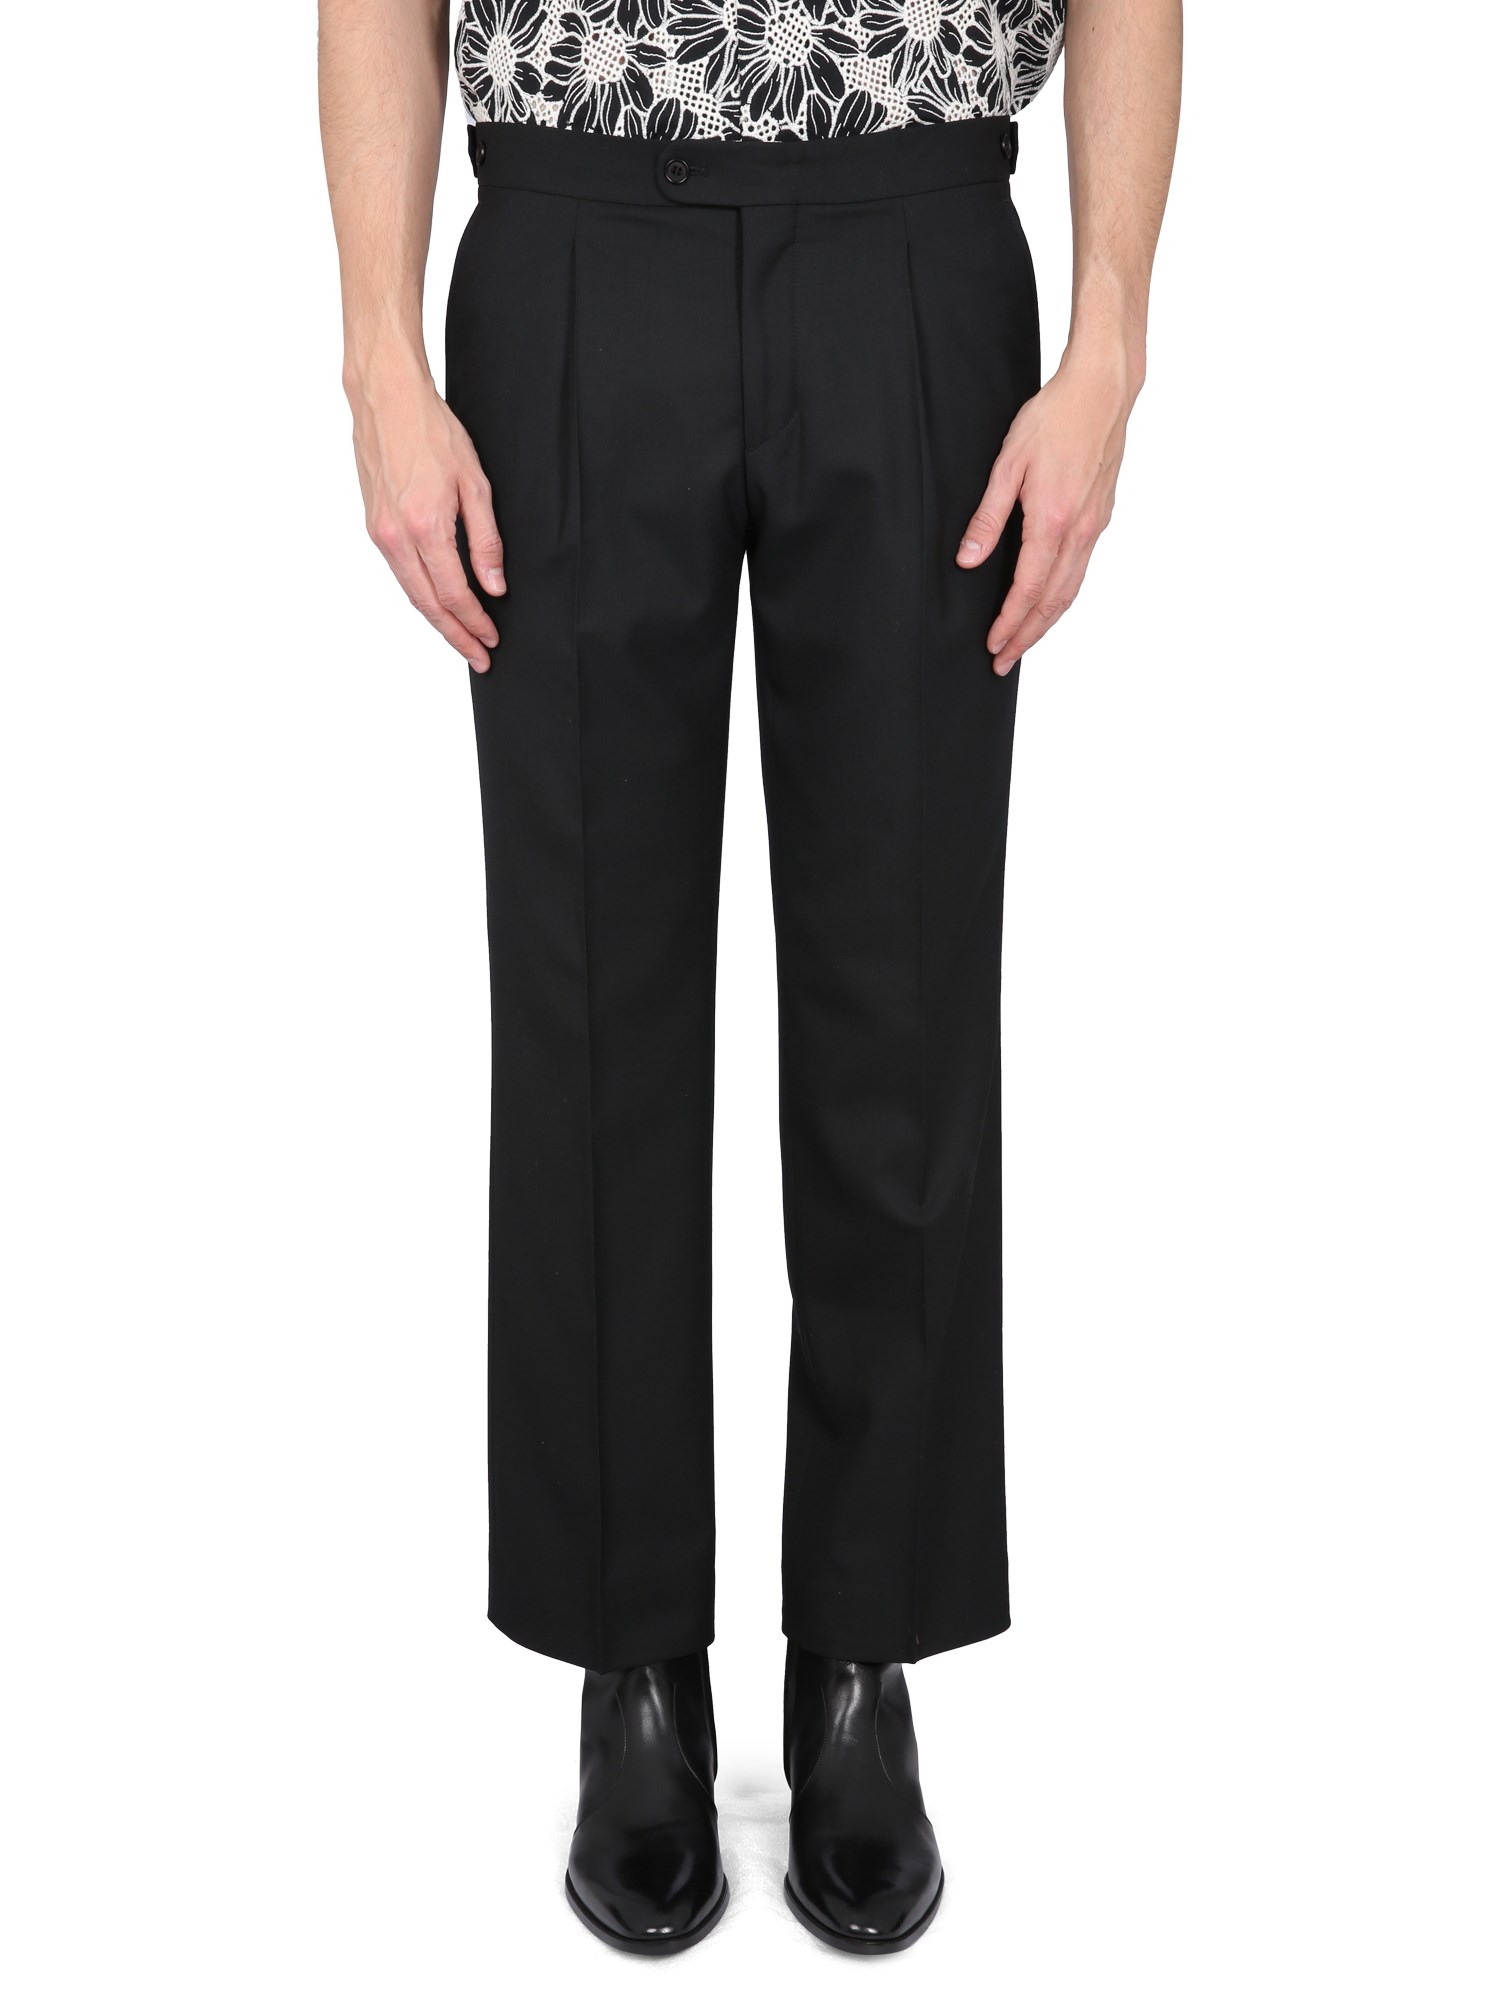 Shop Sunflower Max Pants. In Black